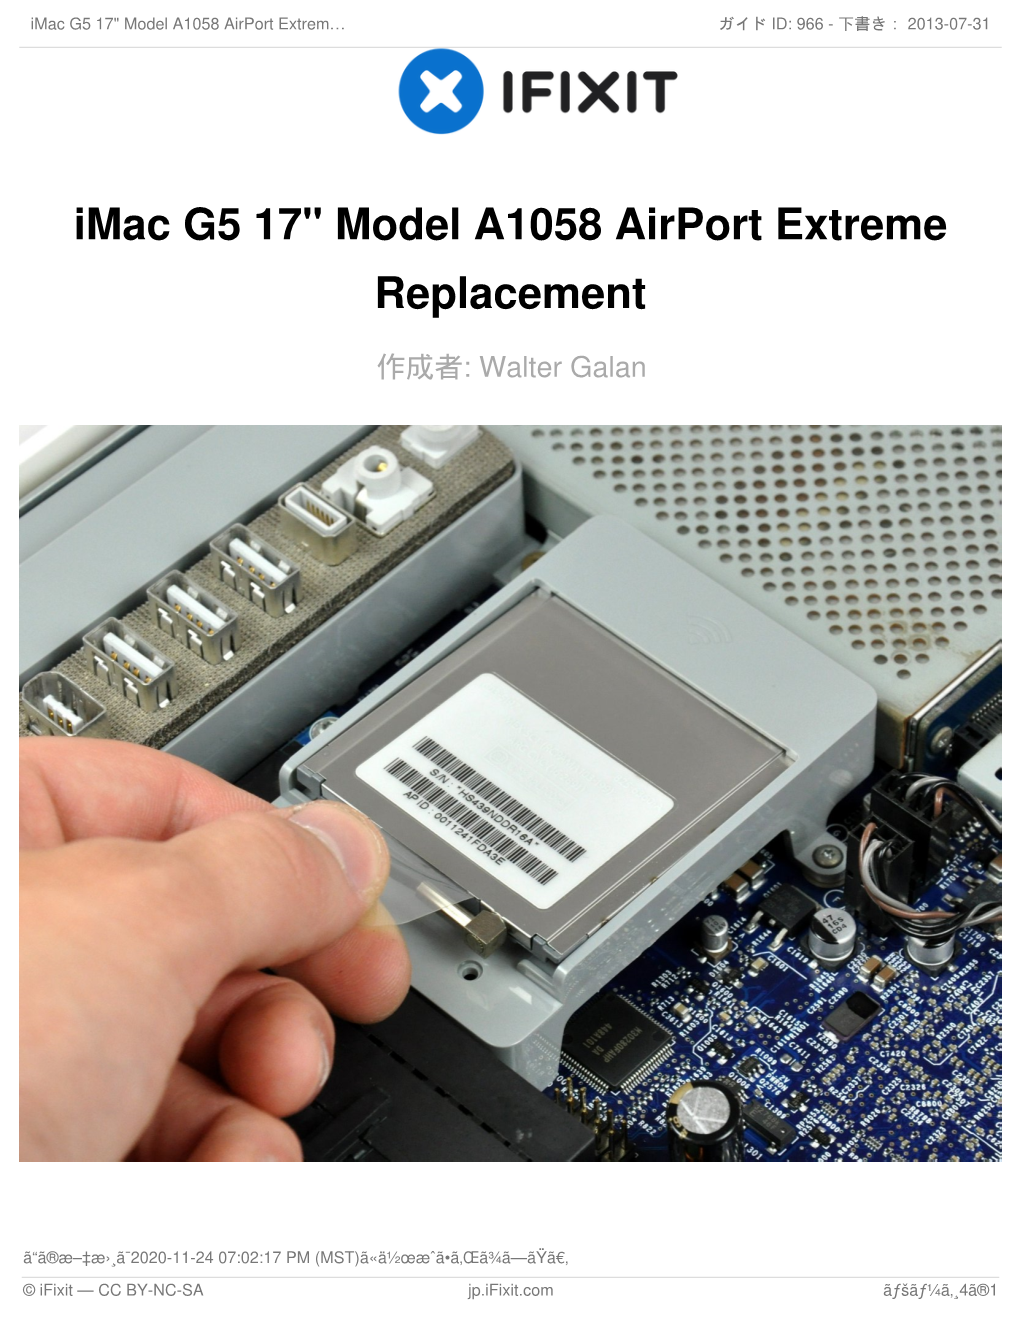 Imac G5 17" Model A1058 Airport Extreme Replacement